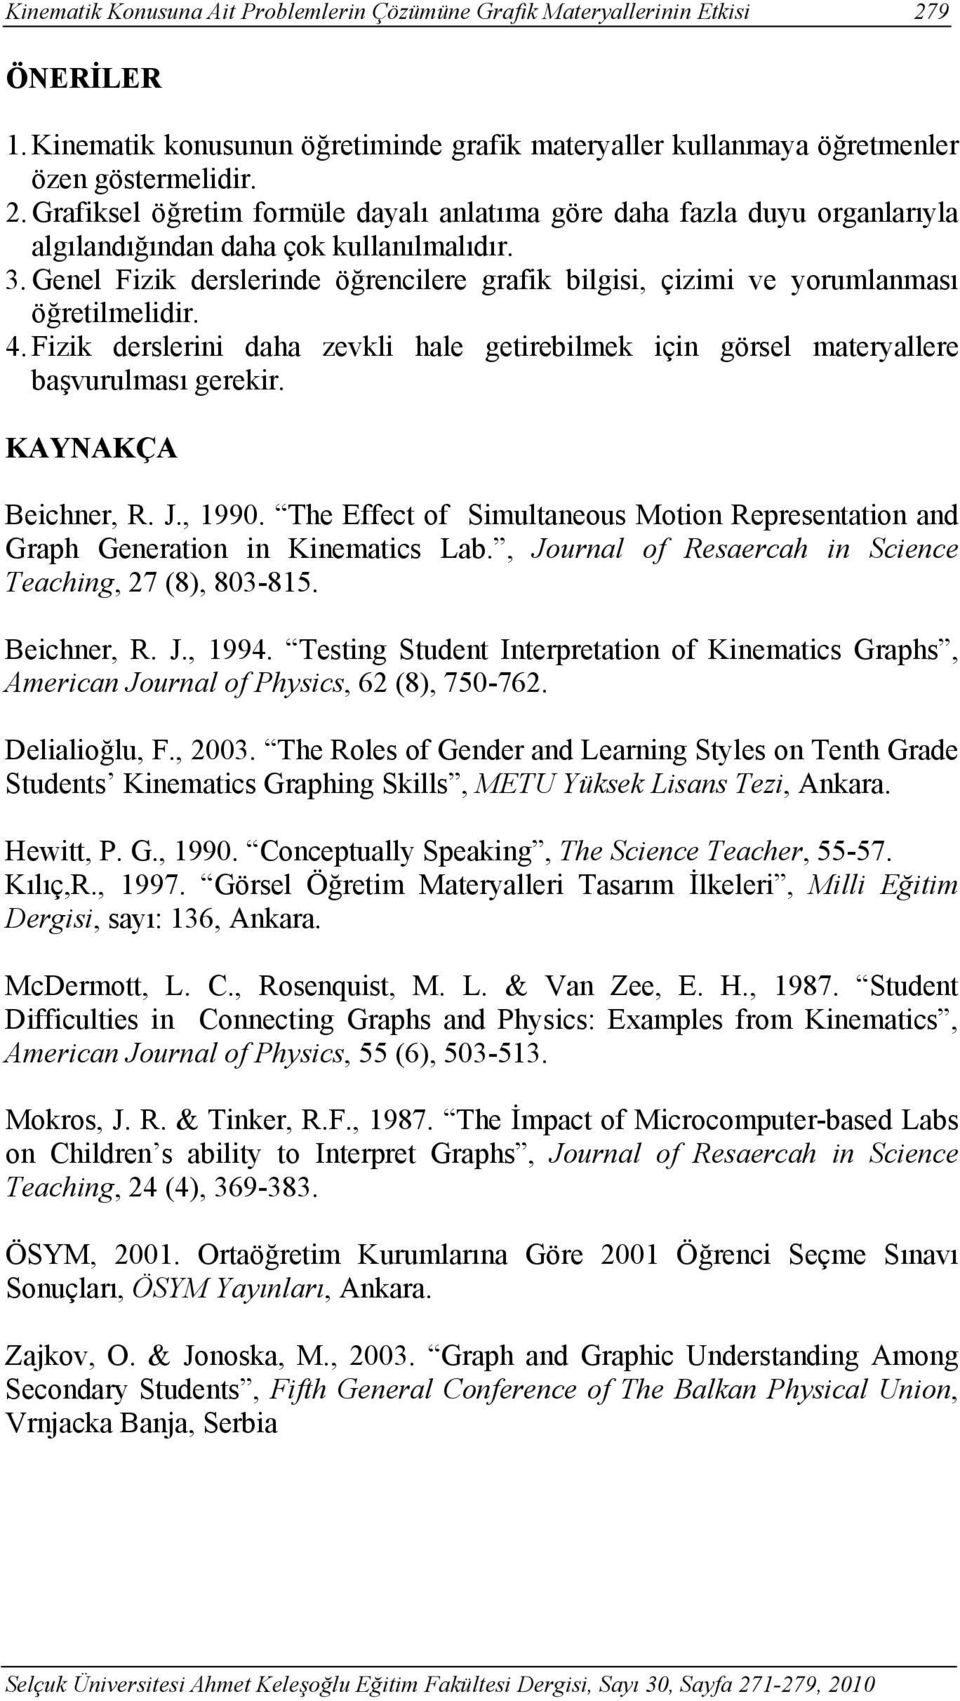 KAYNAKÇA Beichner, R. J., 1990. The Effect of Simultaneous Motion Representation and Graph Generation in Kinematics Lab., Journal of Resaercah in Science Teaching, 27 (8), 803-815. Beichner, R. J., 1994.